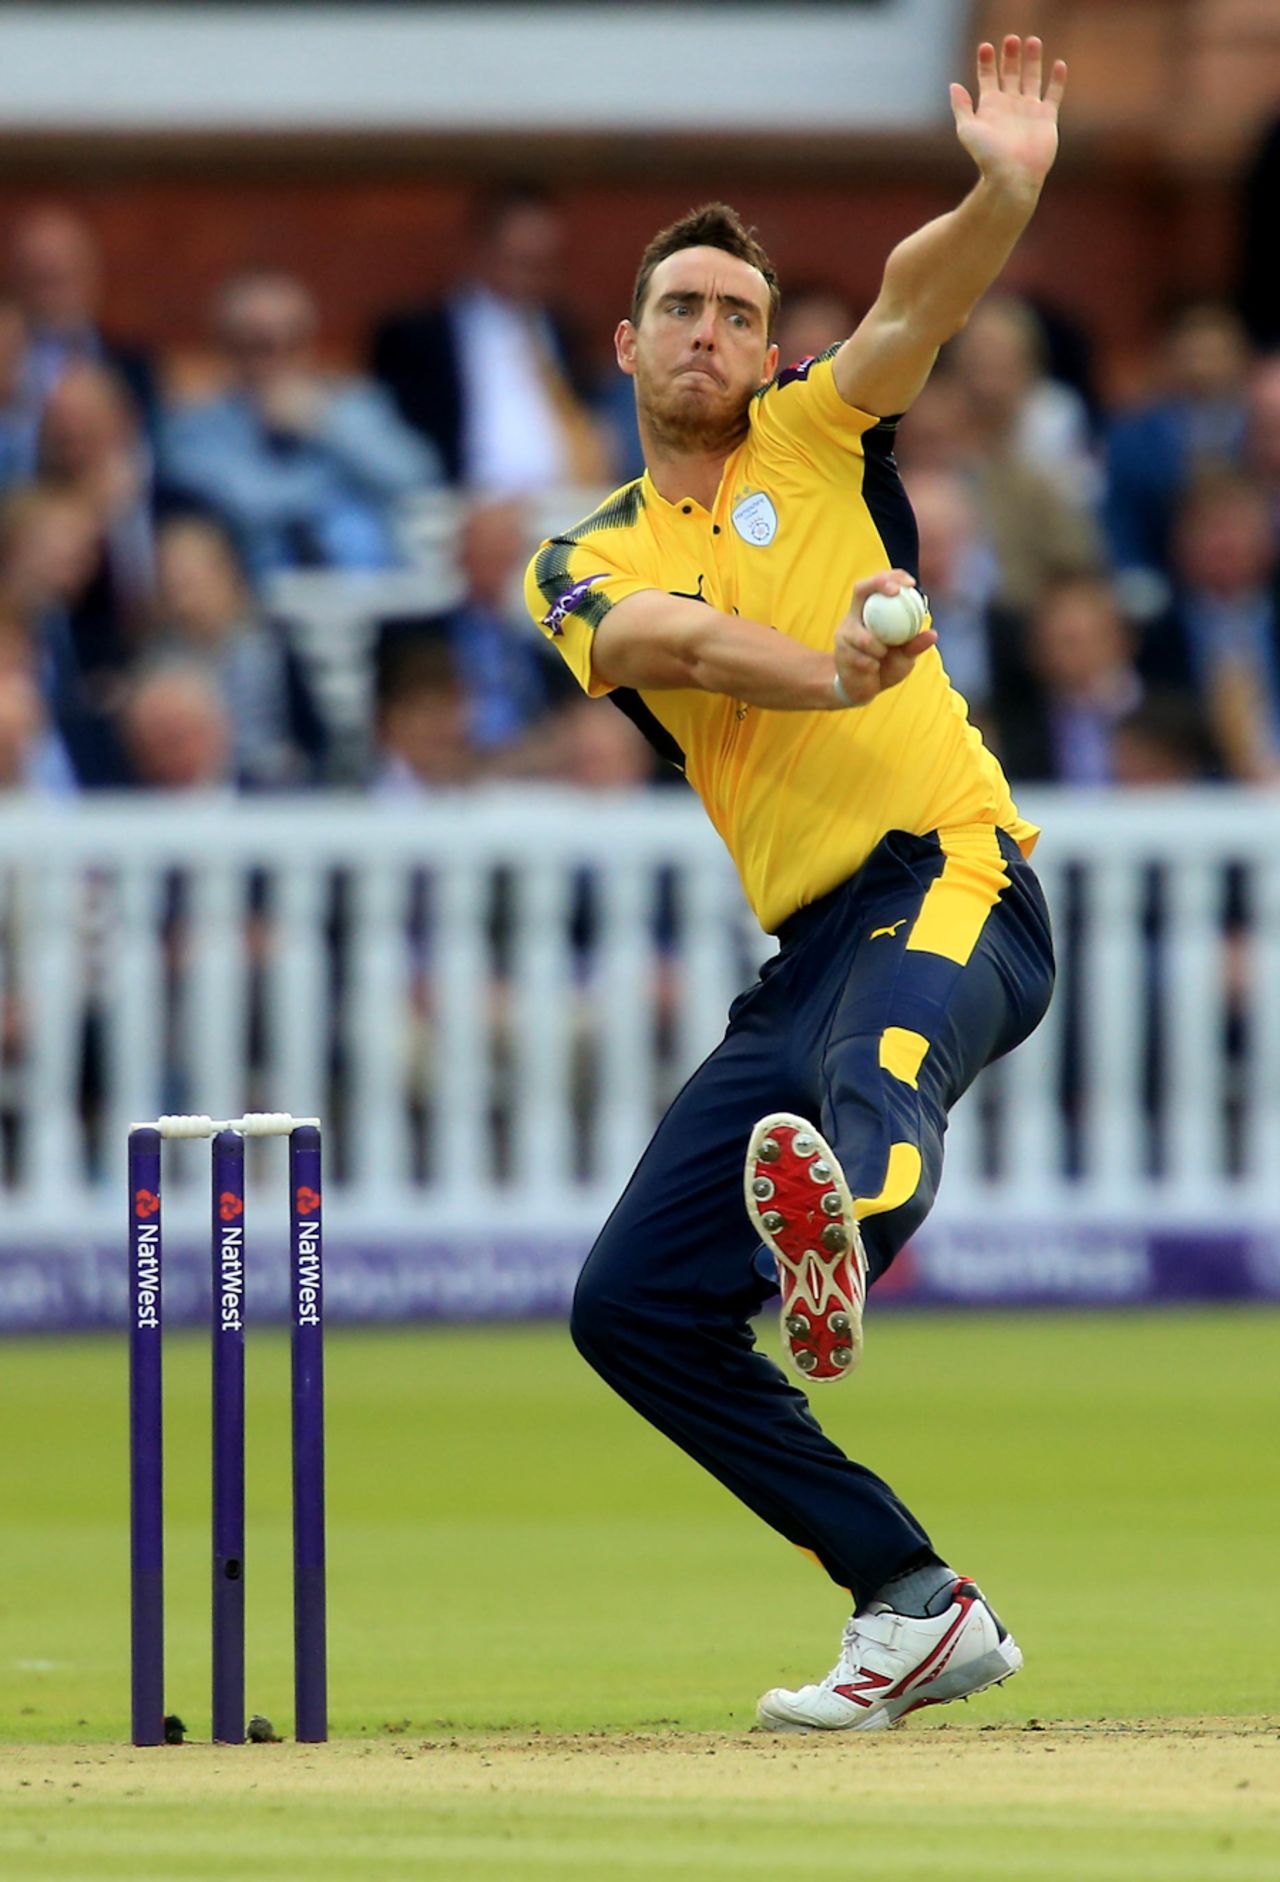 Kyle Abbott kept Middlesex in check with three wickets, Middlesex v Hampshire, NatWest Blast, South Group, August 3, 2017